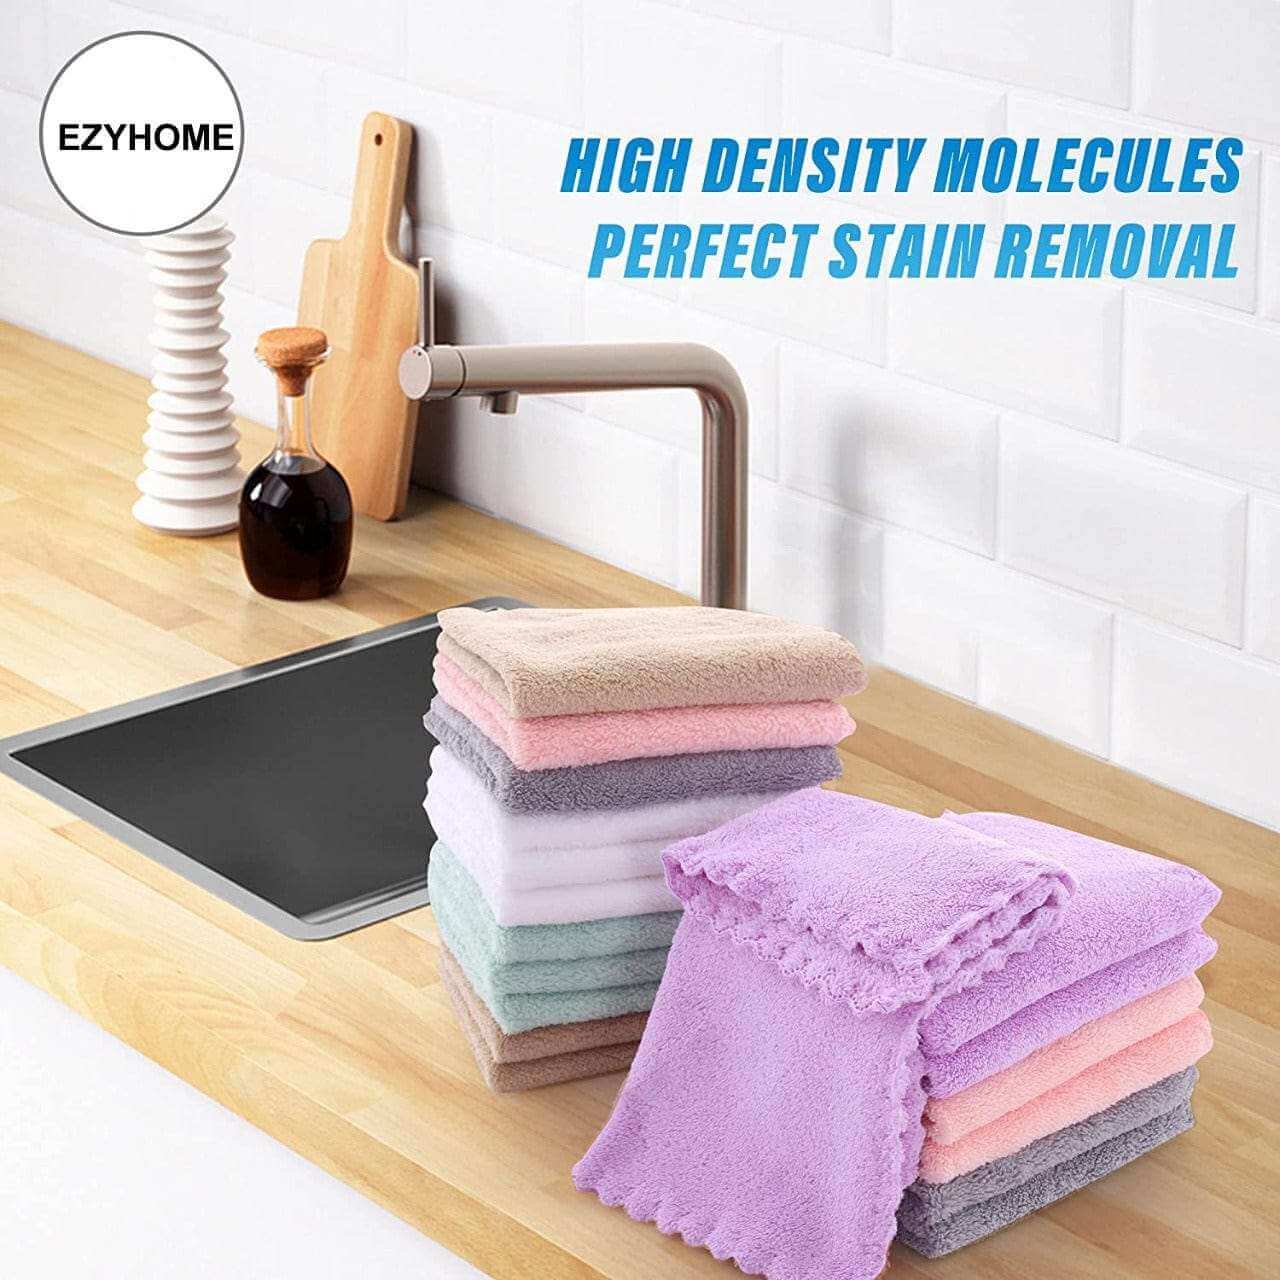 EZYHOME 8 Pack Microfiber Cleaning Cloth - Super Absorbent 10 × 10 Inch Reusable Cleaning Rags,Premium Dish Cloths, Coral Fleece Cleaning Towels, Nonstick Oil Washable Fast Drying - kutkutst